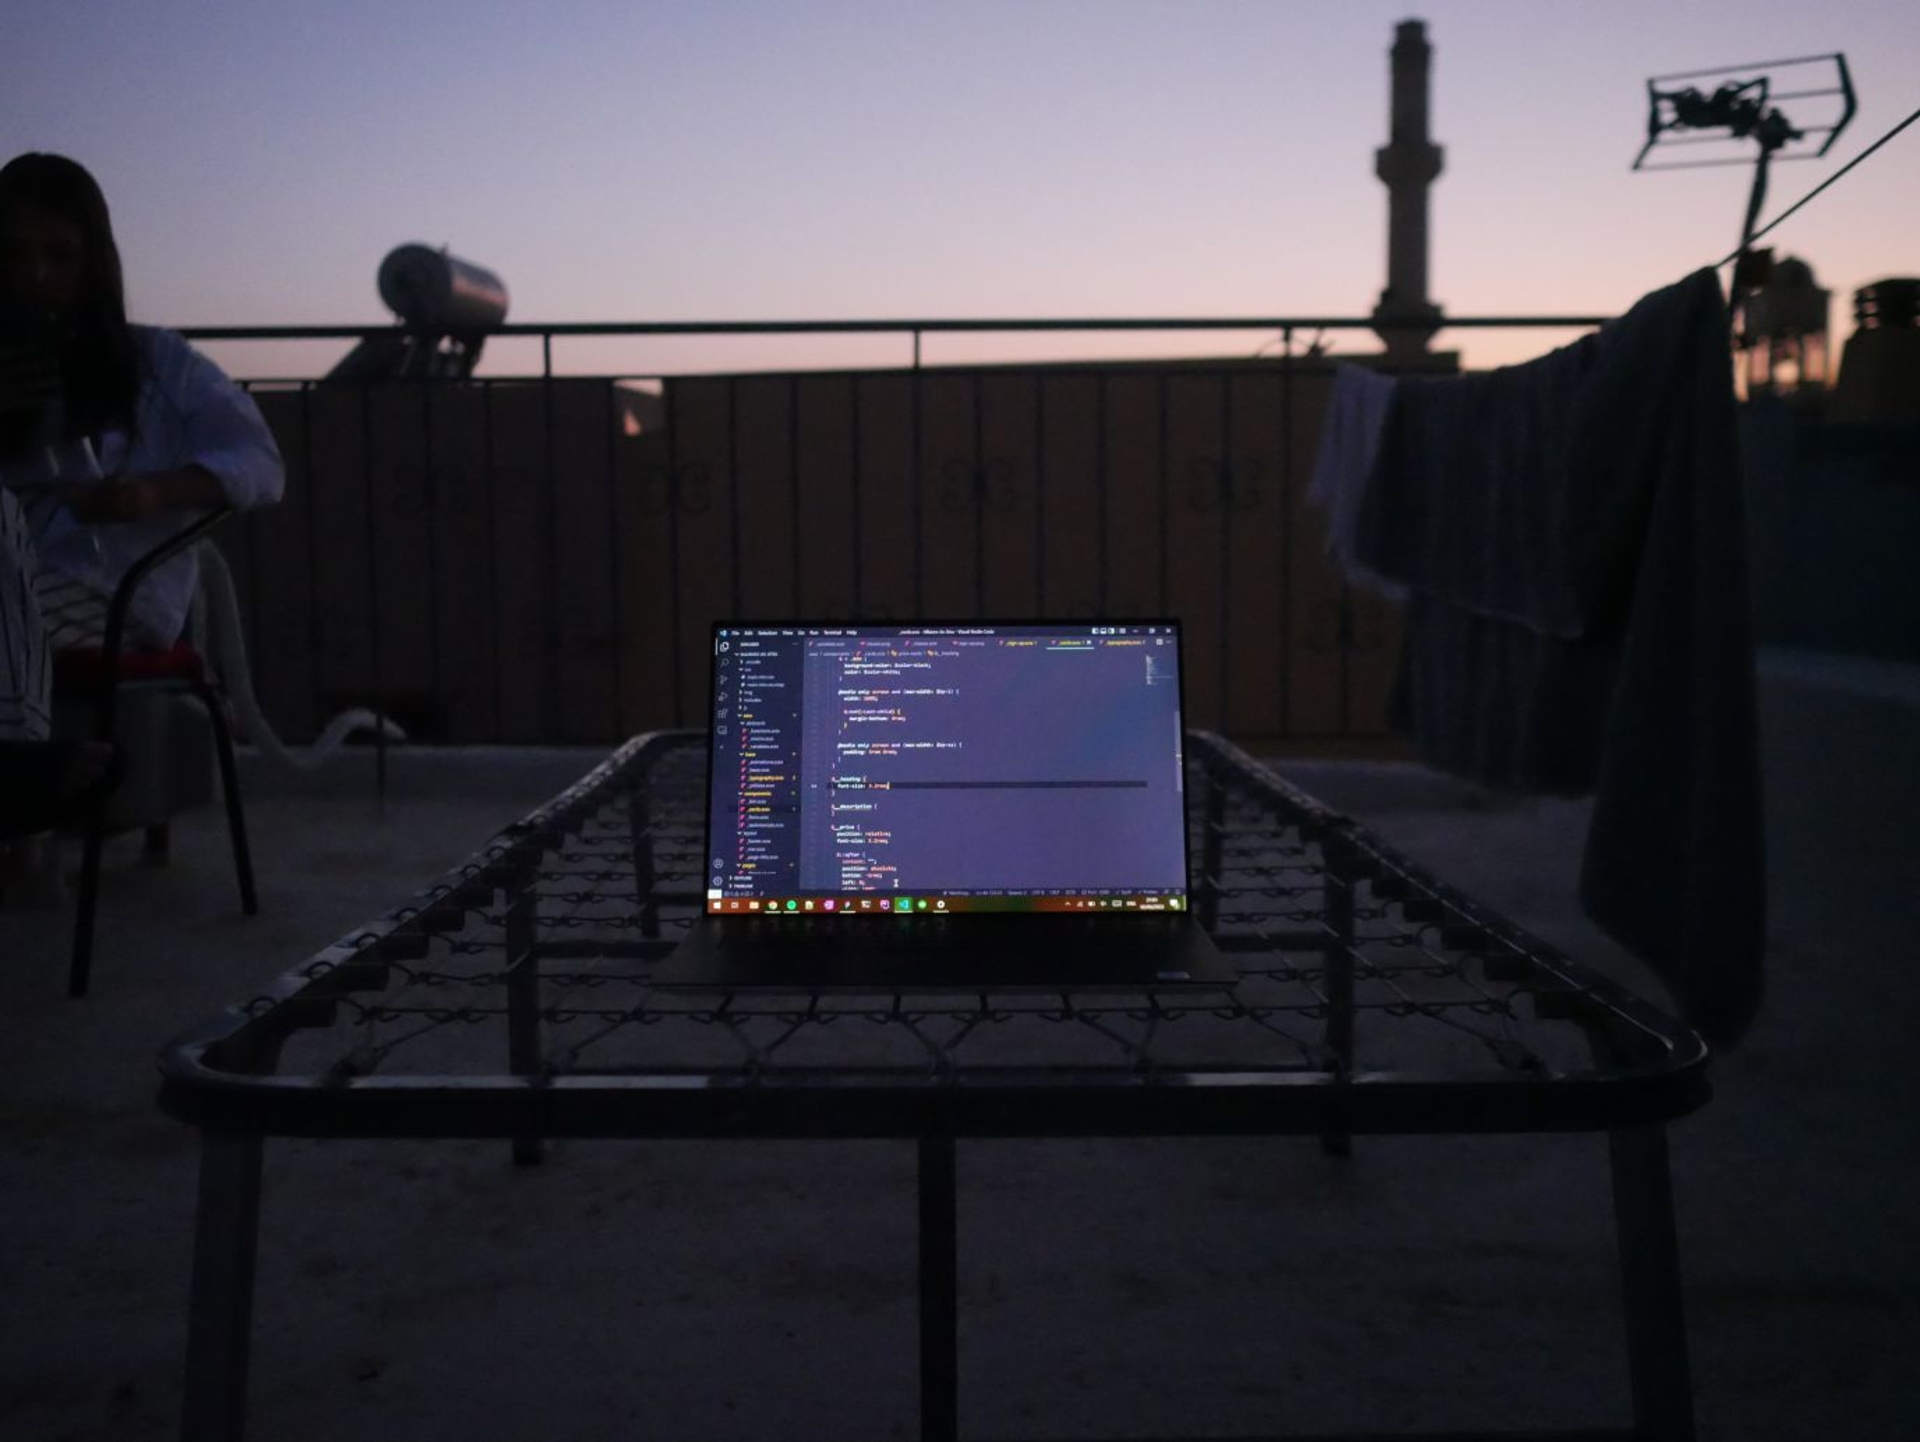 Laptop with lines of code on a roof terrace in Chania, Crete - shot by Lucian Chevallier